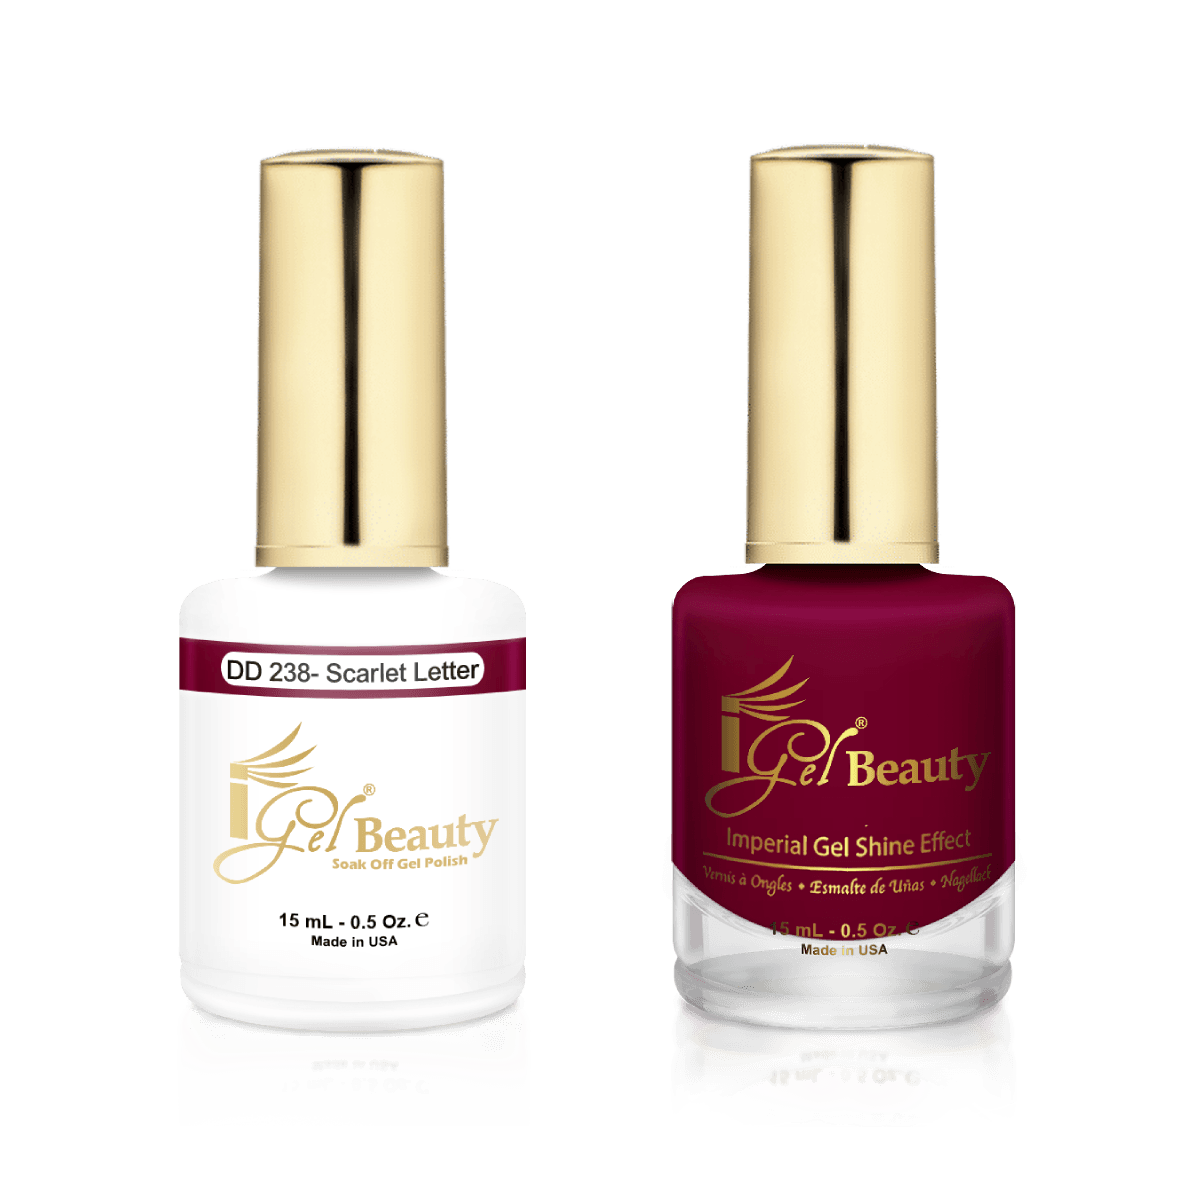 IGel Duo Gel Polish + Matching Nail Lacquer DD 238 SCARLET LETTER